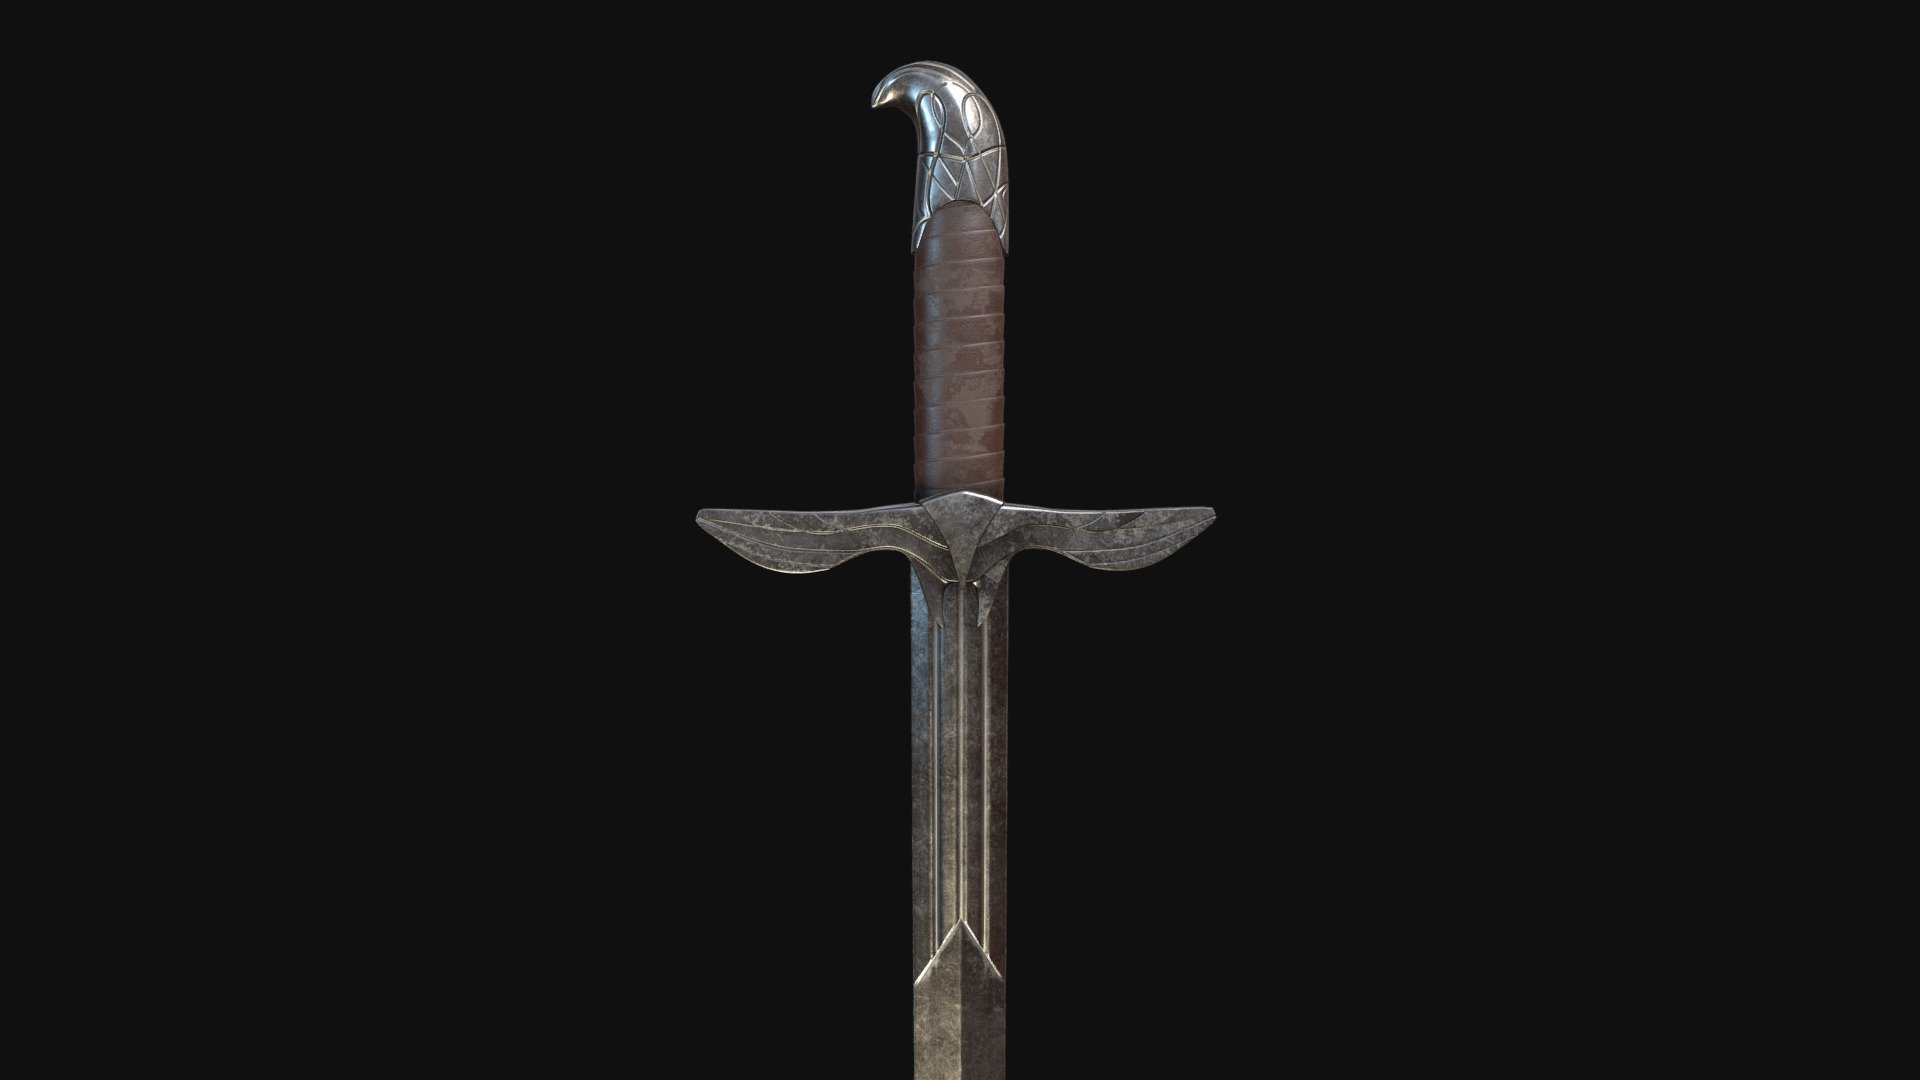 A high-detail model of the famous sword of Altair. It features the classic eagle head as a pommel, and the whole guard area is very reminiscent of the original sword. I took some liberties when it came to the rune-like details on the pommel itself, but tried to remain as close the the original(s) as possible.

The  sword was done via classic hard surface modelling, only said details on the pommels were sculpted and then baked onto the normal map. 
I gave the blade textures a good amount of wear, and went overall for a less clean &ldquo;game-y